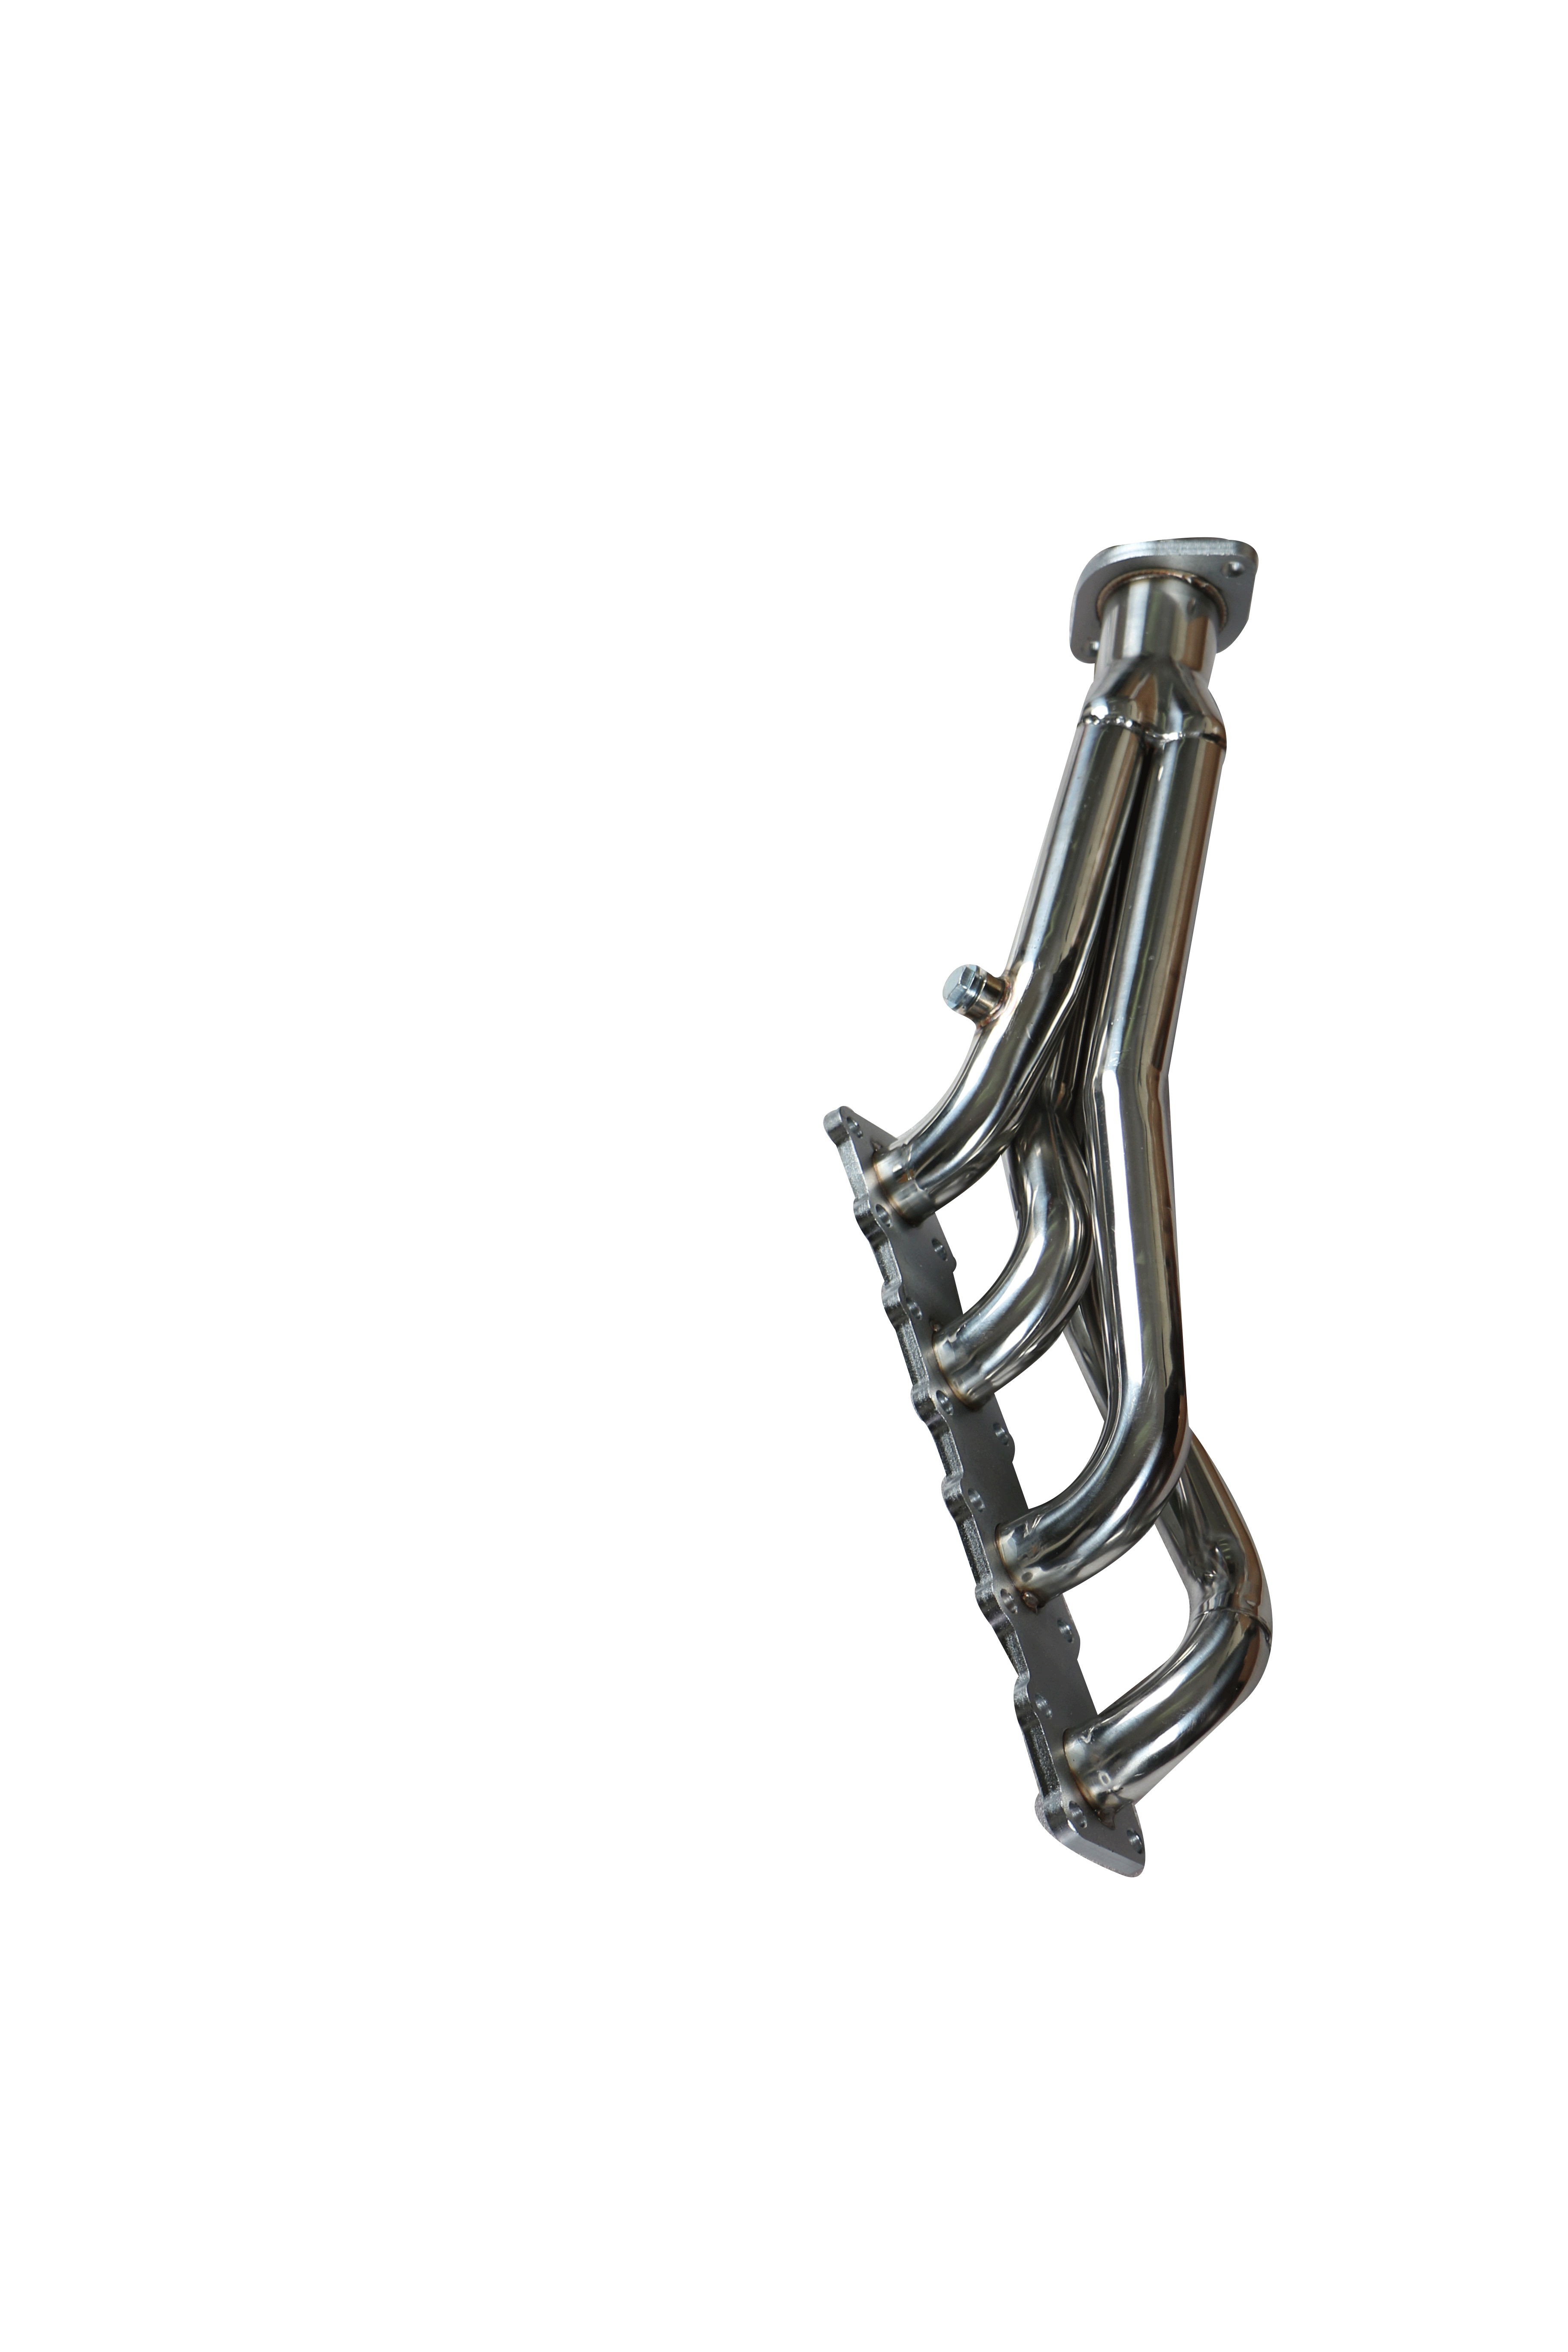 FOR 04-15 NISSAN TITAN/ARMADA A60 STAINLESS PERFORMANCE 1.25mm Stainless Steel 304/201 HEADER EXHAUST MANIFOLD